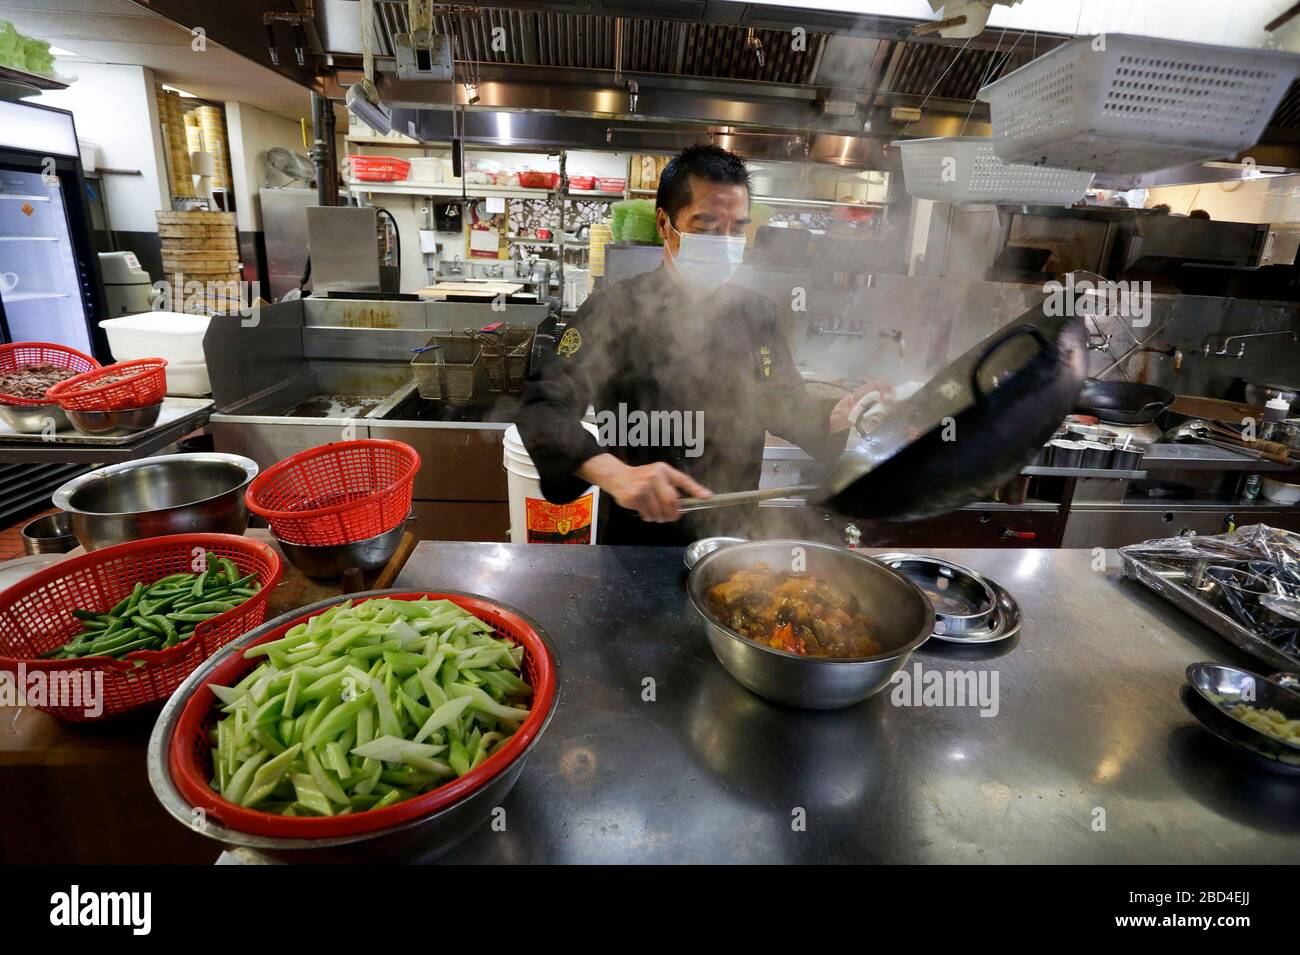 Vancouver, Canada. 6th Apr, 2020. A chef prepares food inside the kitchen for the frontline workers of Vancouver General Hospital at a Chinese restaurant in Vancouver, Canada, April 6, 2020. The Canadian government is recruiting volunteers to support frontline healthcare workers to combat the COVID-19 crisis. Some local Chinese restaurants donated meals to the frontline healthcare workers fighting COVID-19. Credit: Liang Sen/Xinhua/Alamy Live News Stock Photo